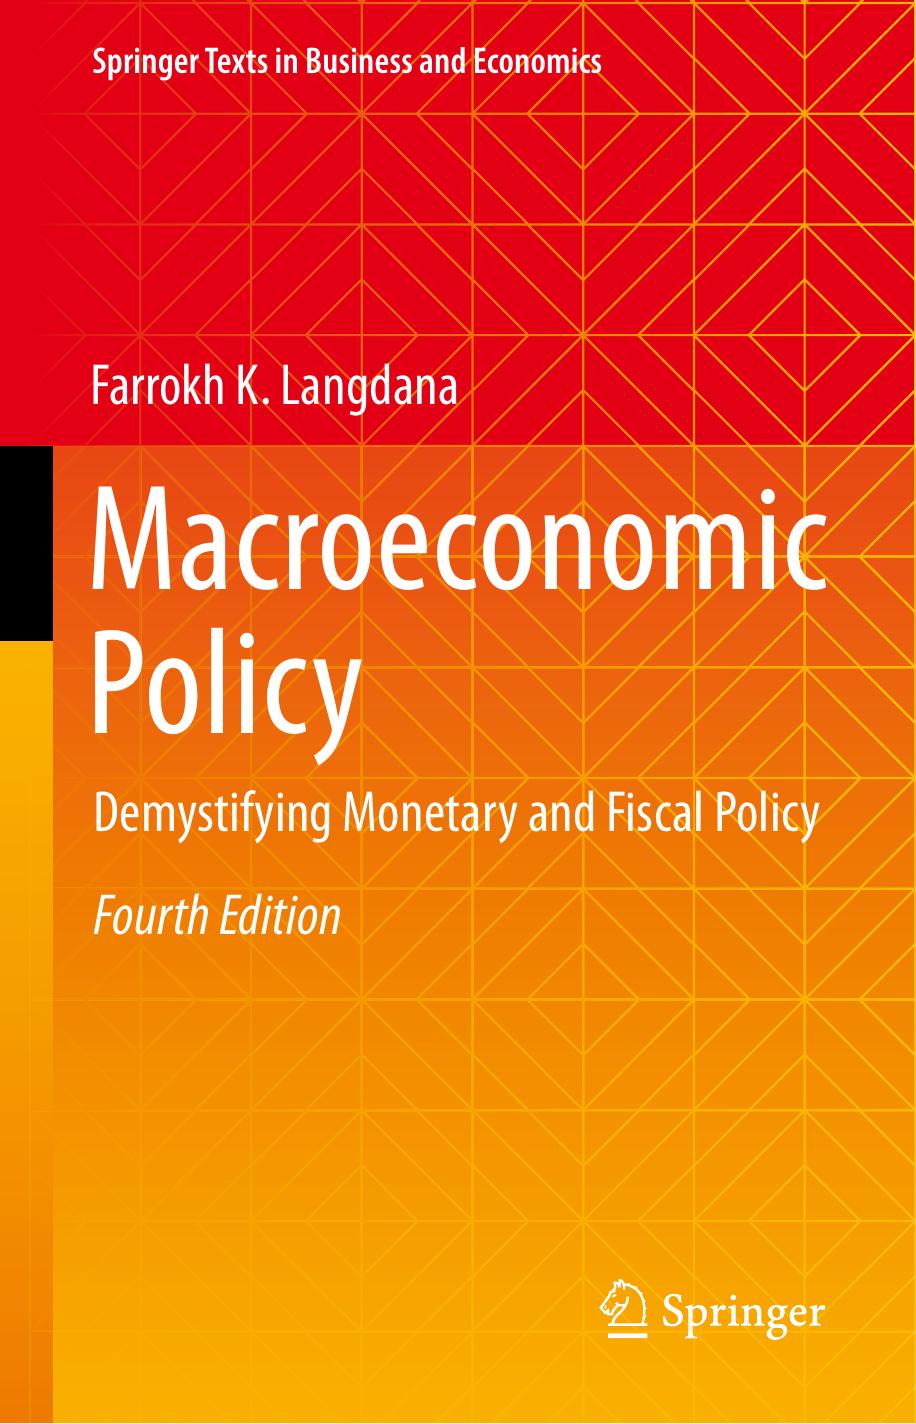 Macroeconomic policy   demystifying monetary and fiscal policy 2022